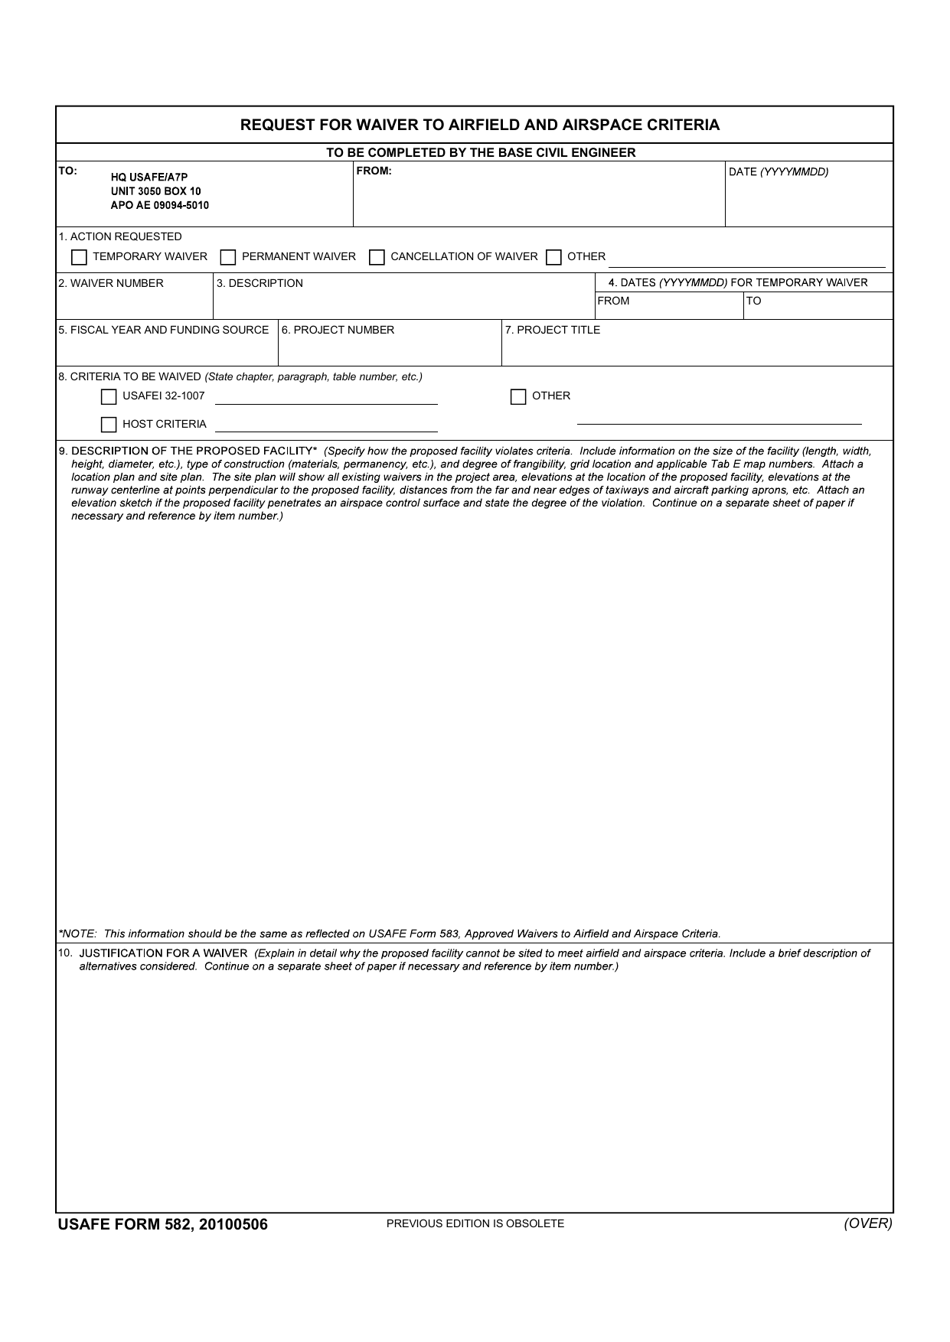 USAFE Form 582 Request for Waiver to Airfield and Airspace Criteria, Page 1